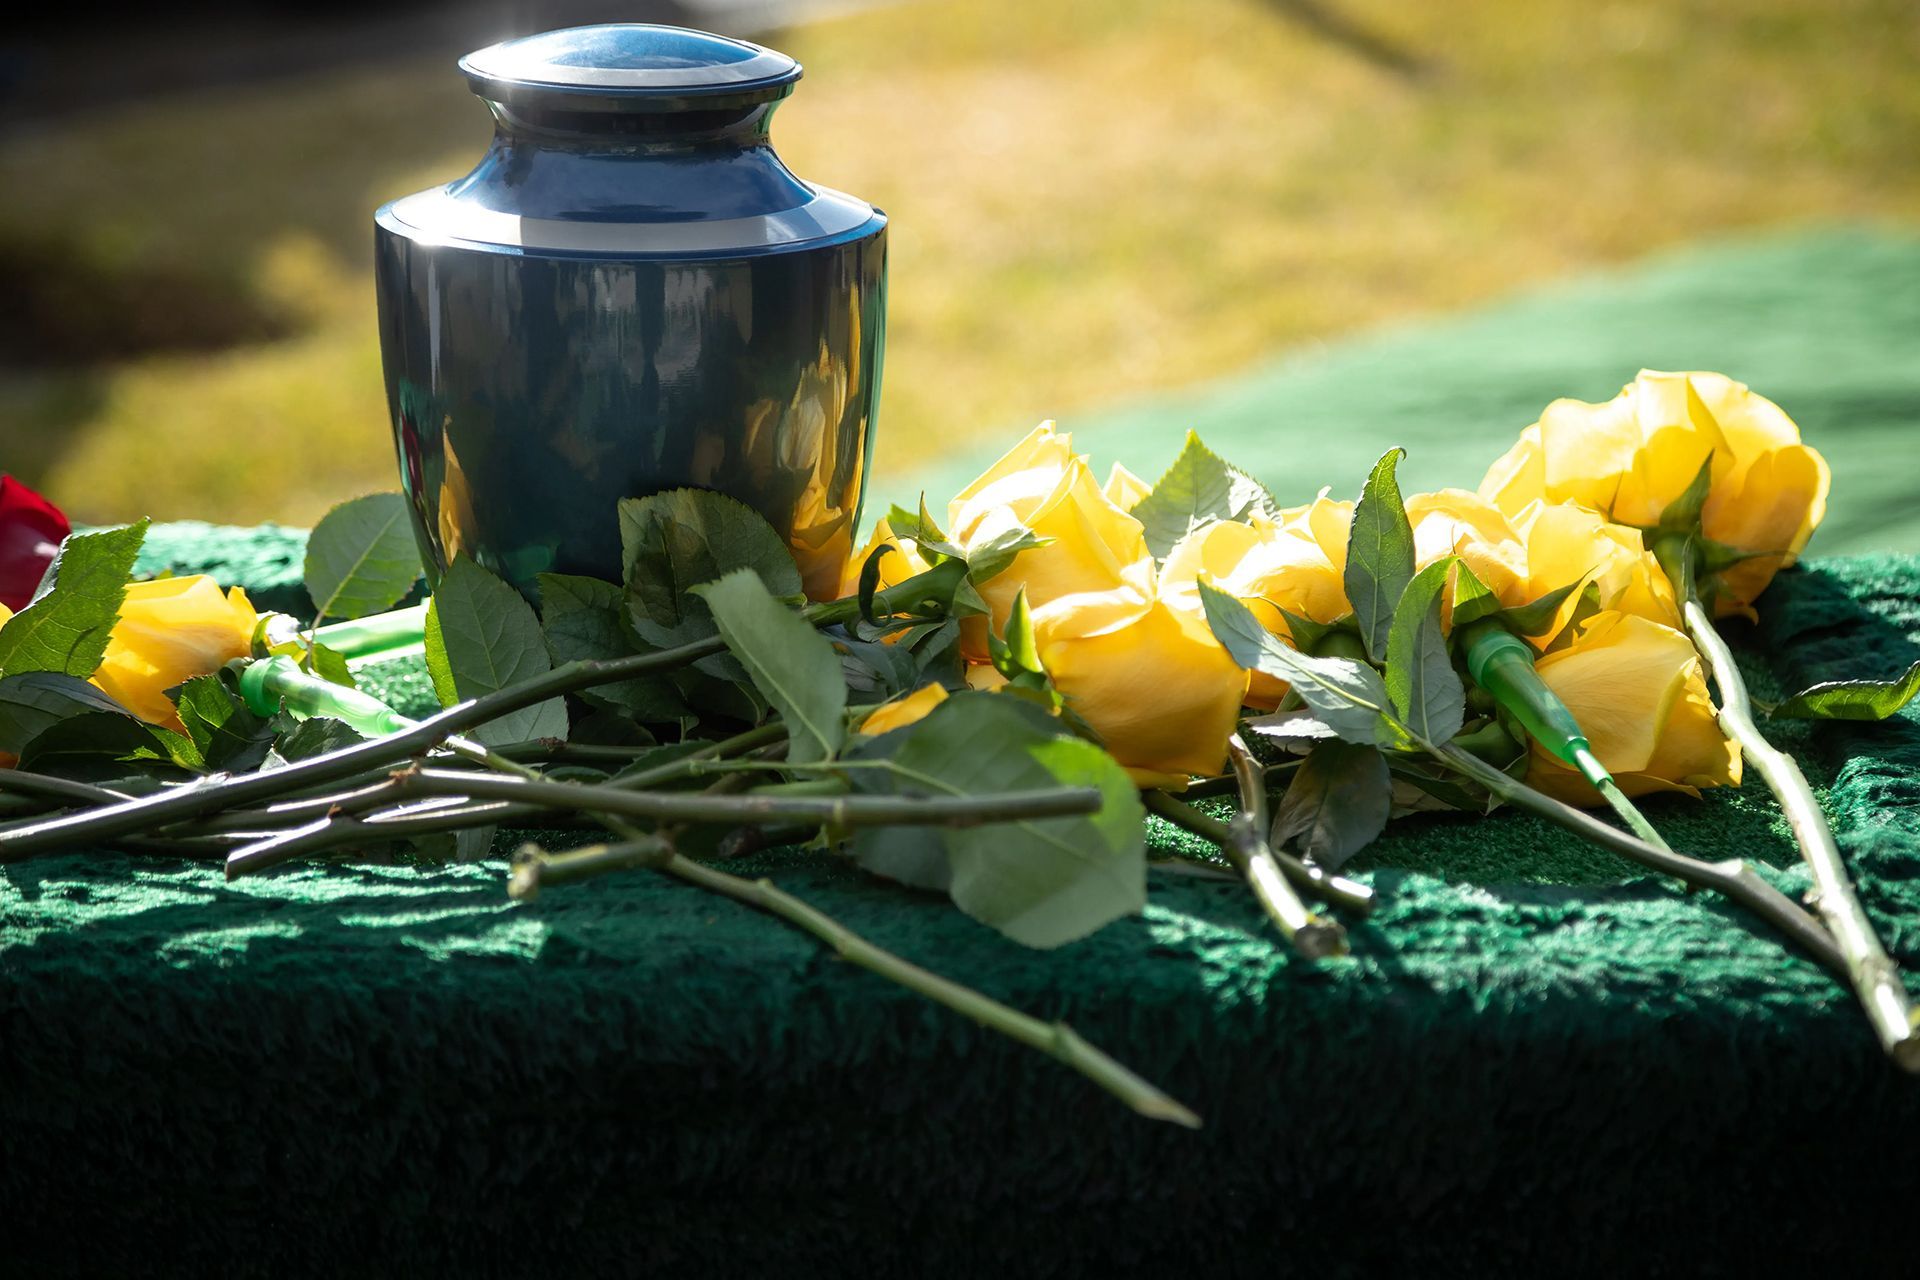 a black urn surrounded by yellow roses and green leaves